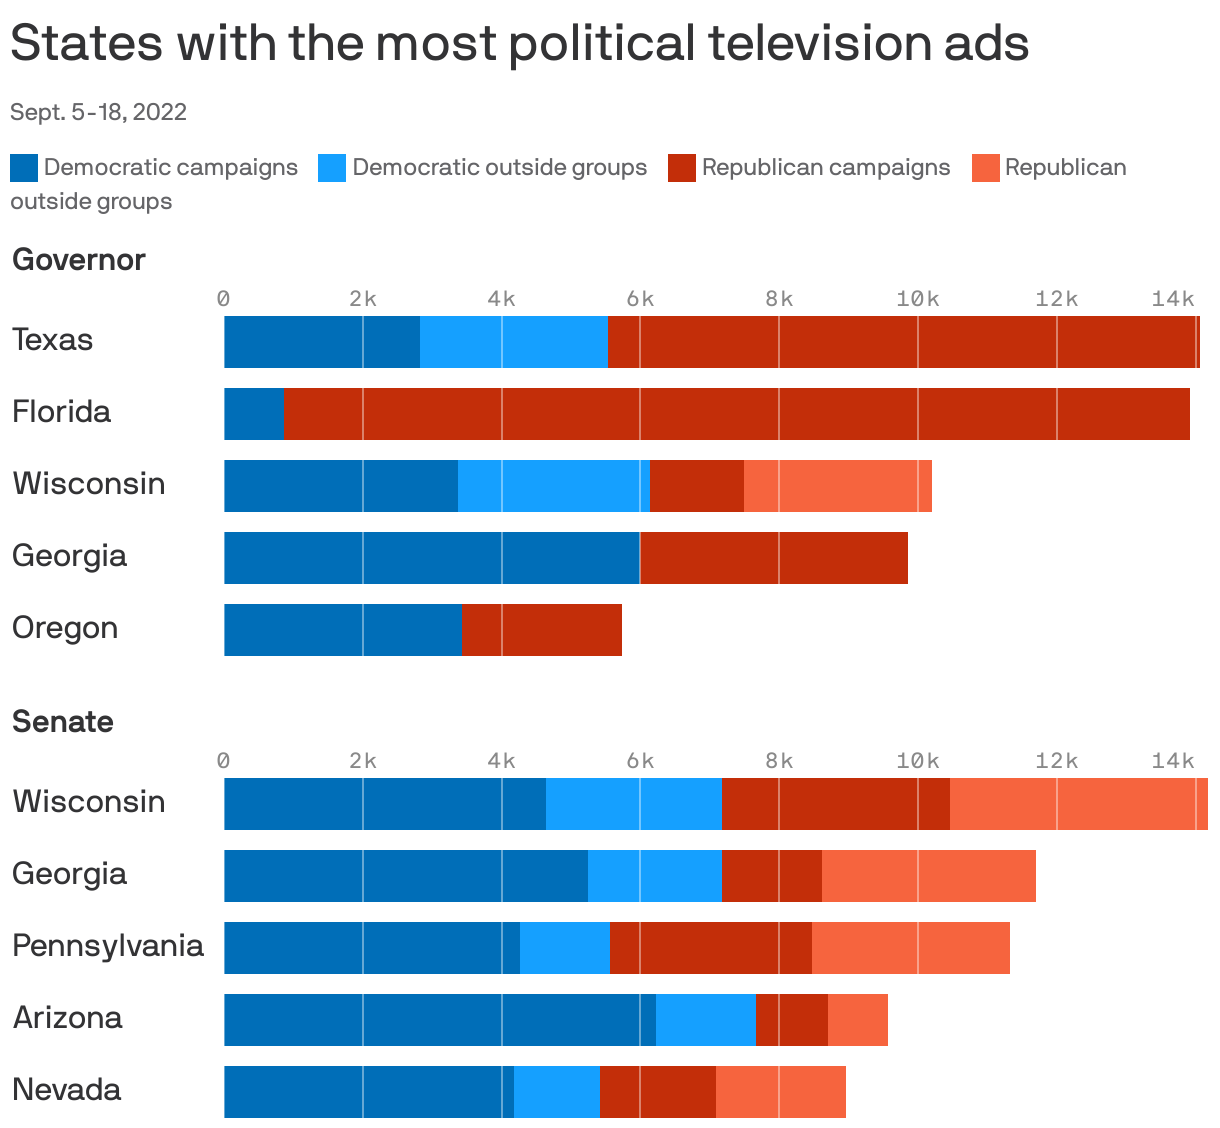 States with the most political television ads